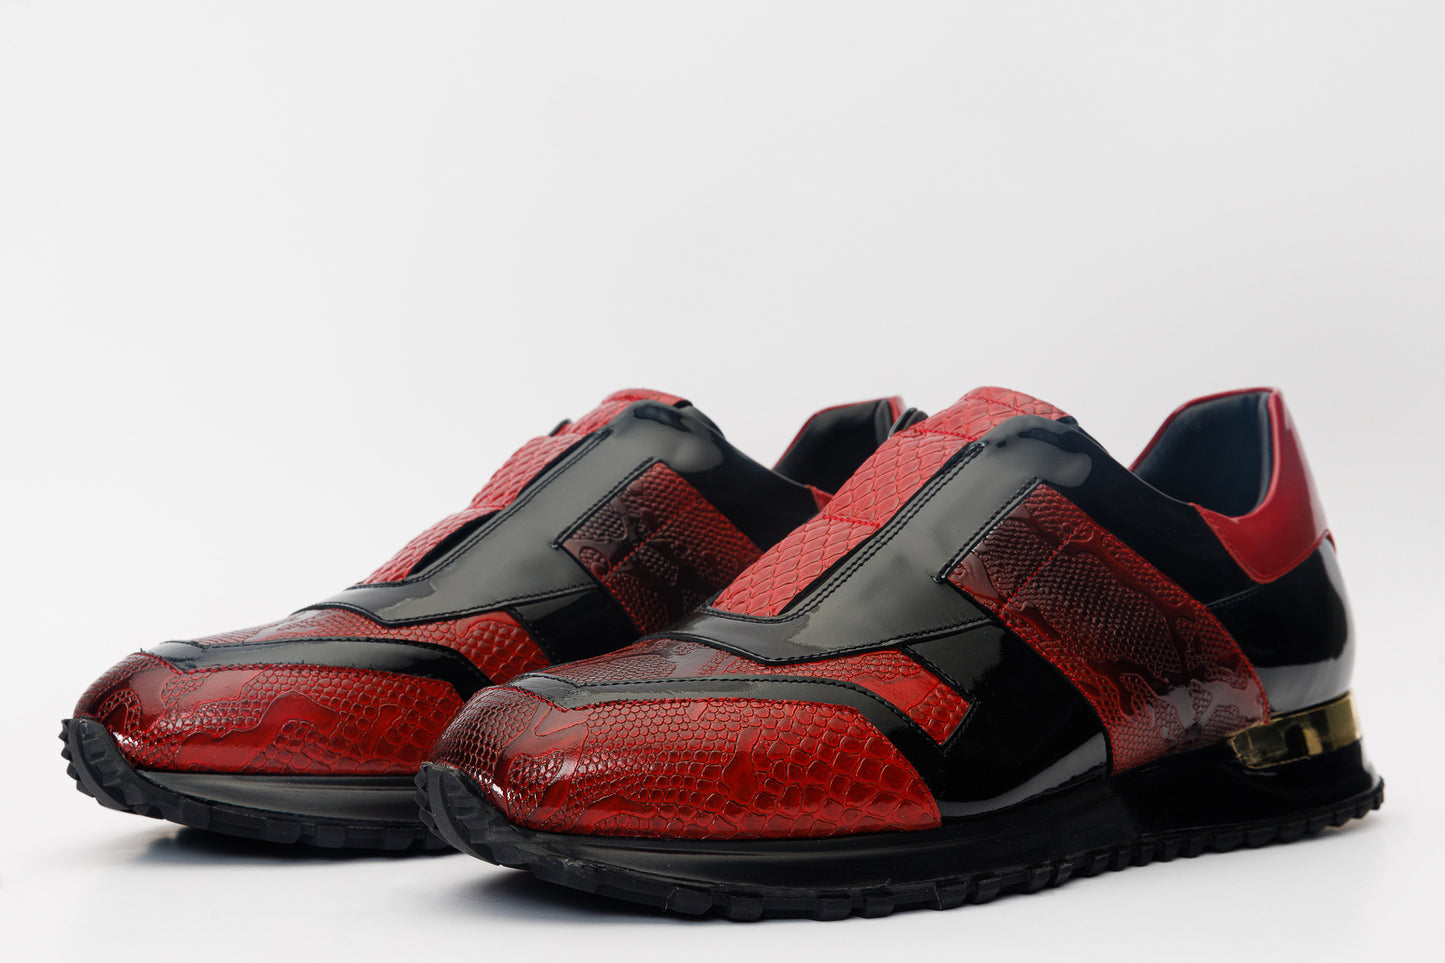 The Milano Snk Red Leather Men Sneaker